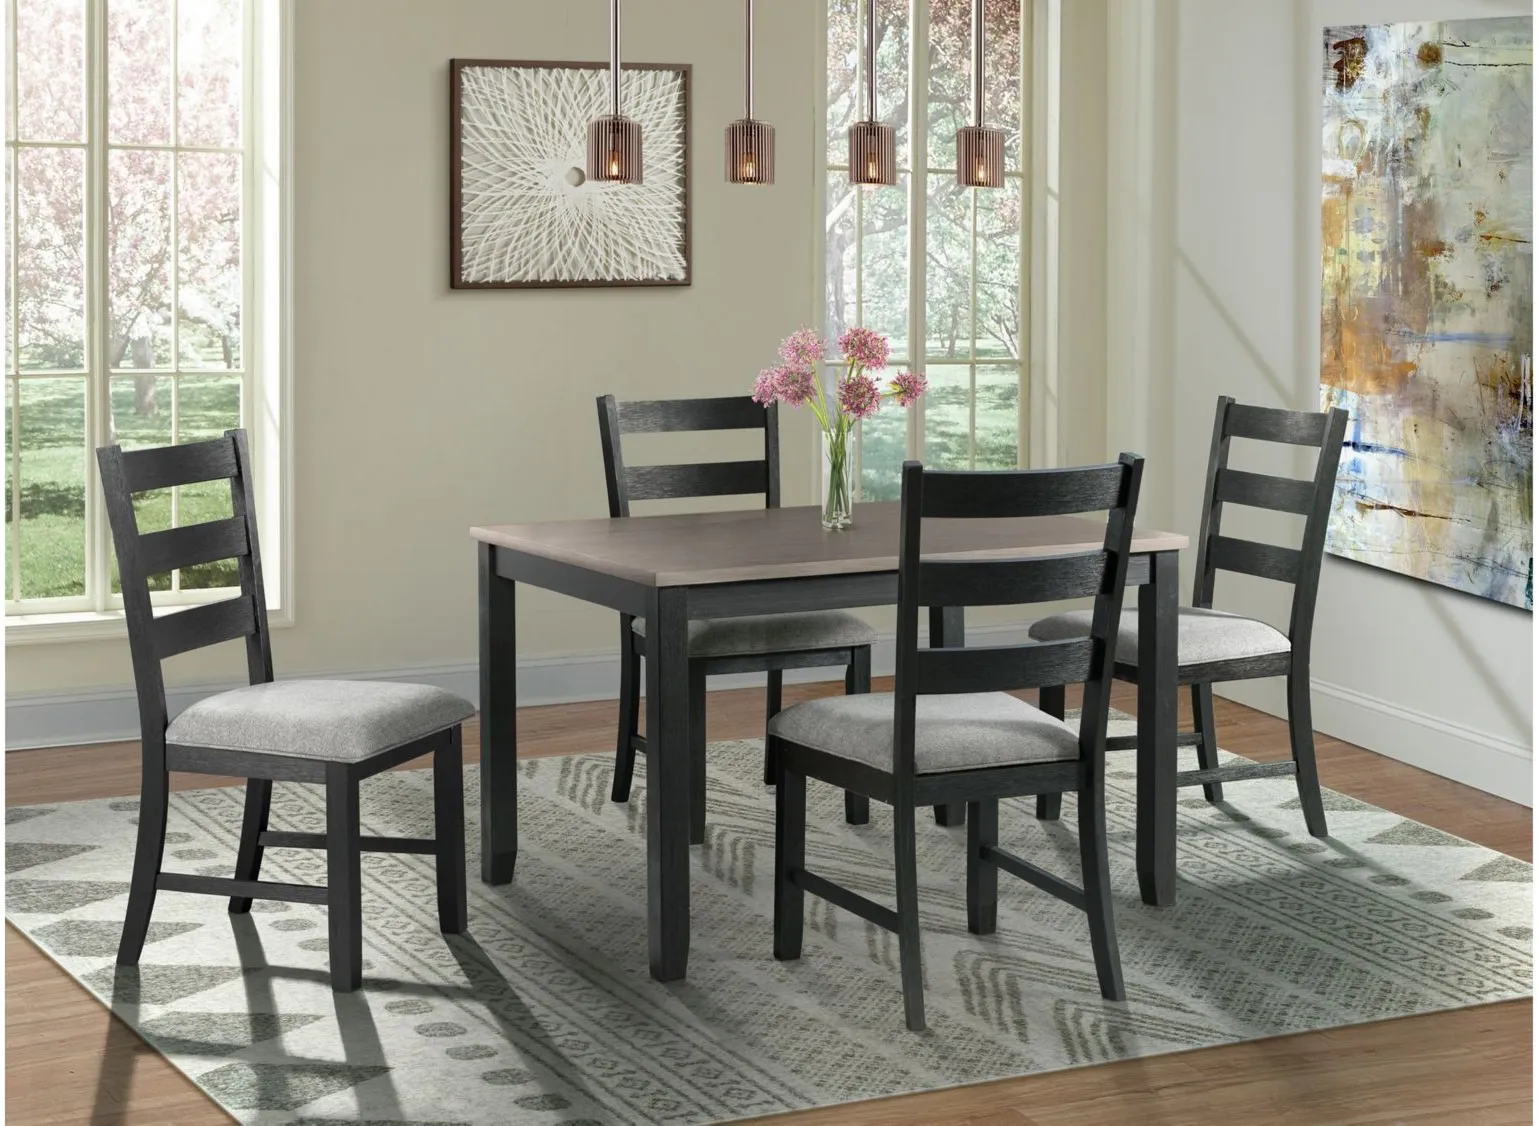 Kona Dining Set -5pc. in Black/Brown/Grey by Elements International Group